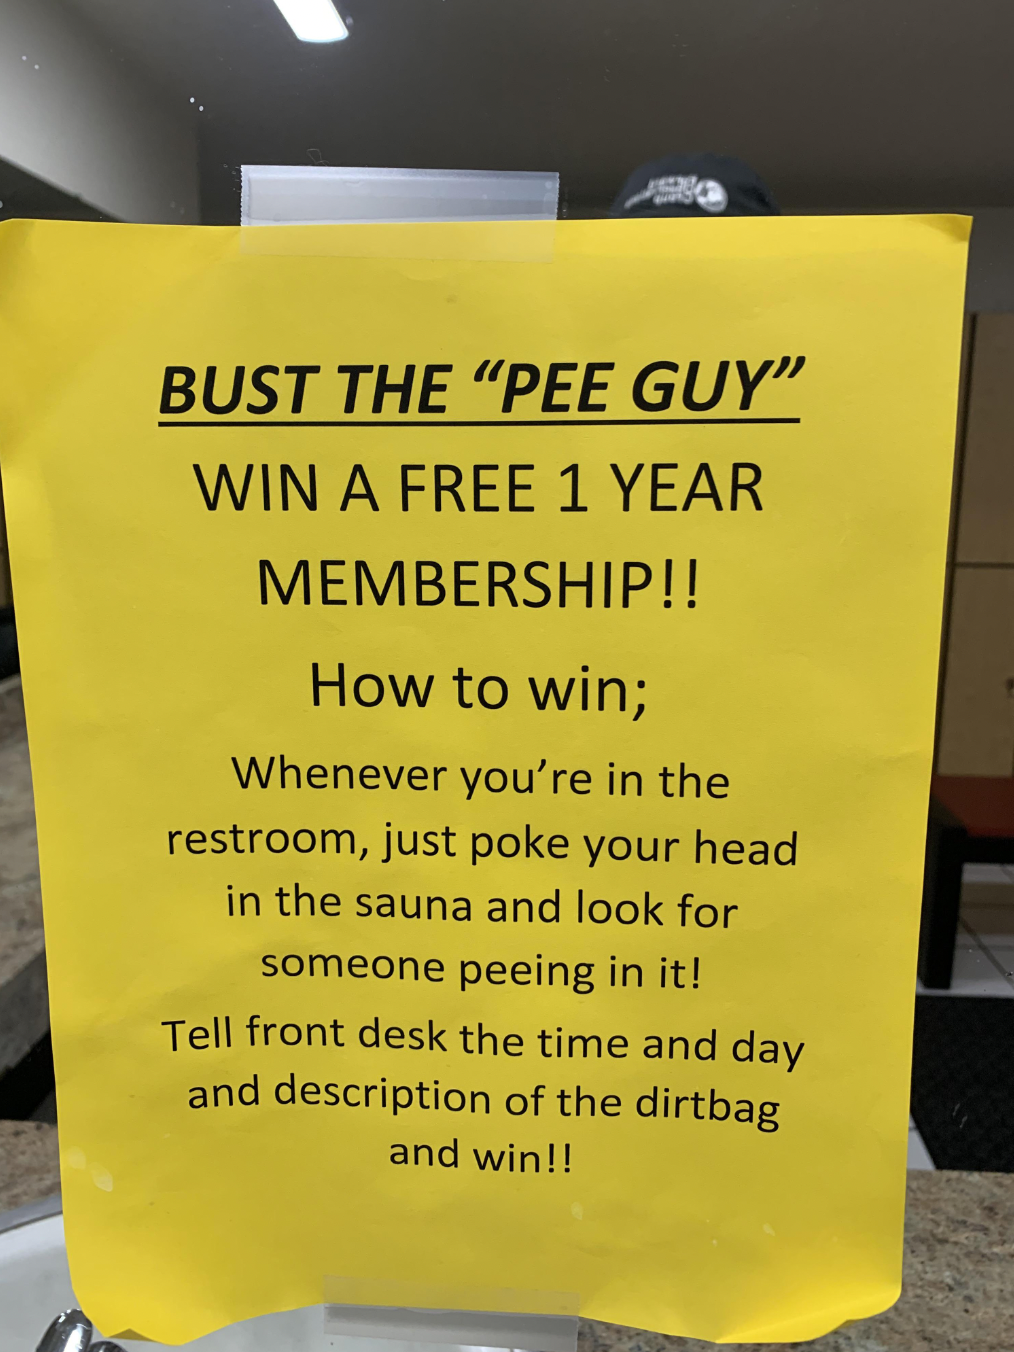 signage - Bust The "Pee Guy" Win A Free 1 Year Membership!! How to win; Whenever you're in the restroom, just poke your head in the sauna and look for someone peeing in it! Tell front desk the time and day and description of the dirtbag and win!!